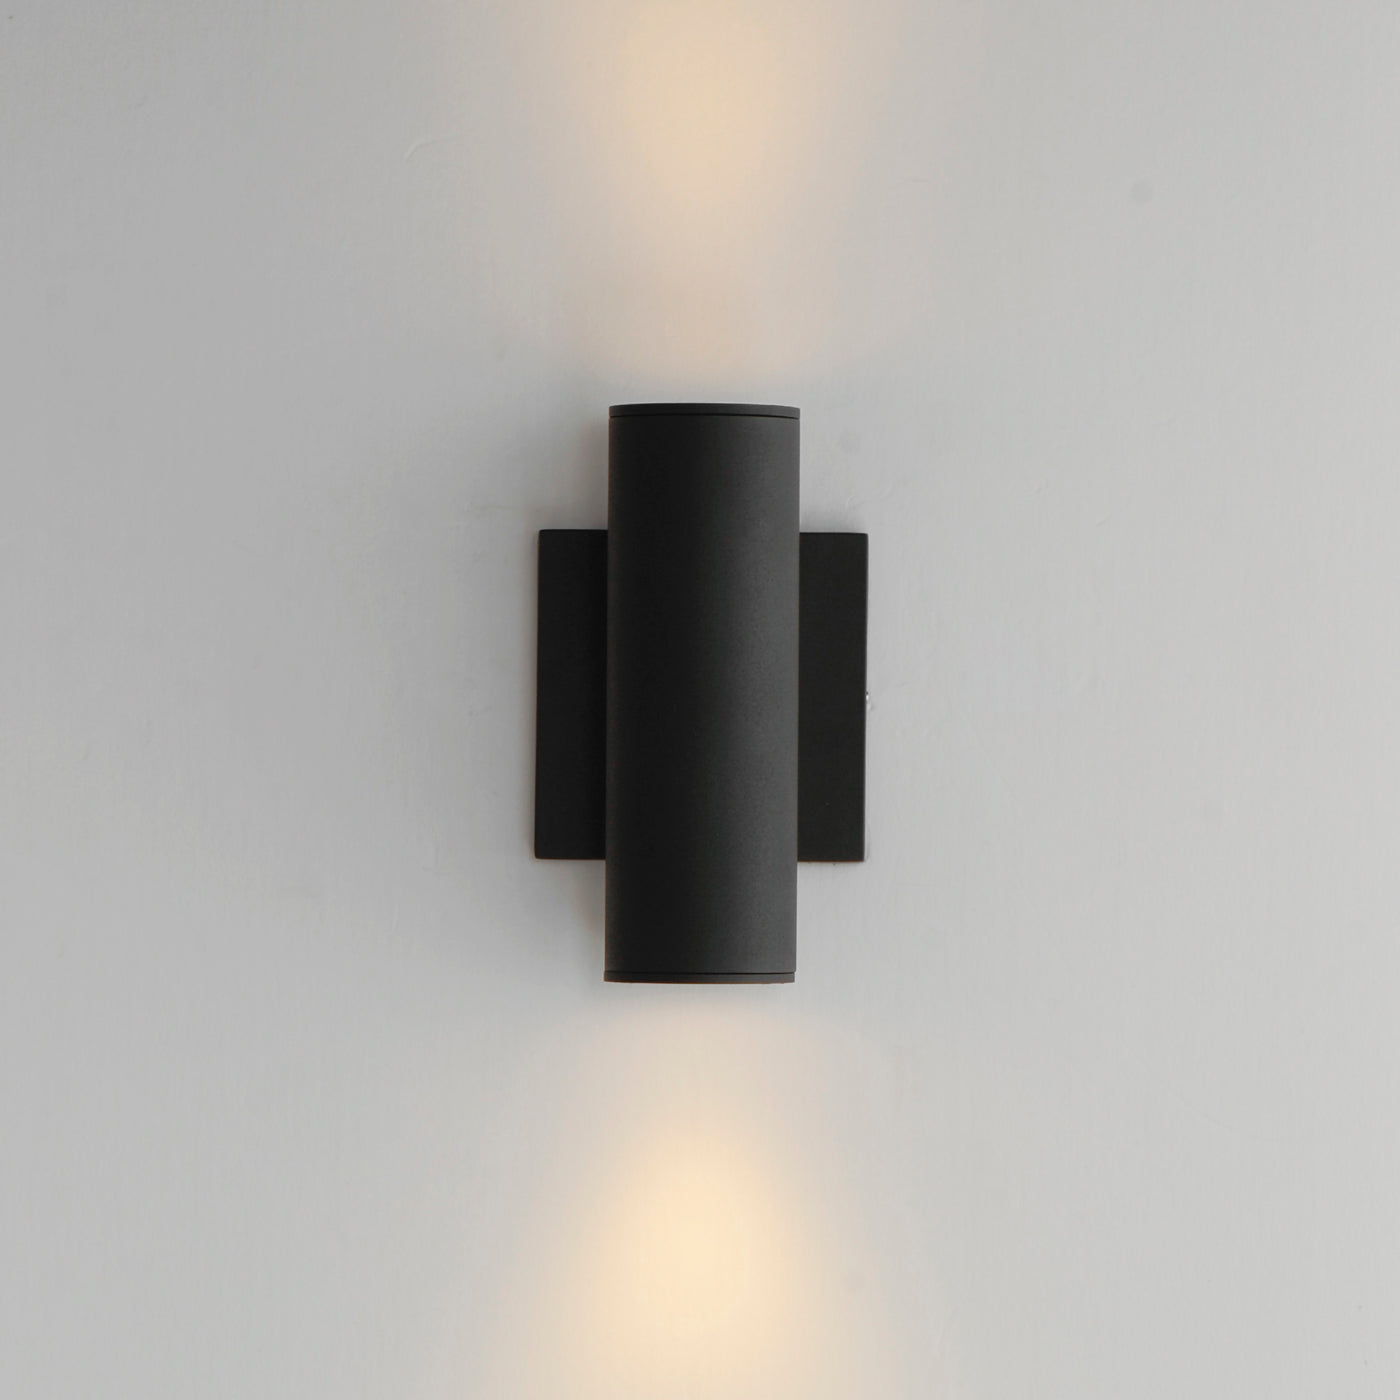 Calibro 7.5" LED Outdoor Sconce